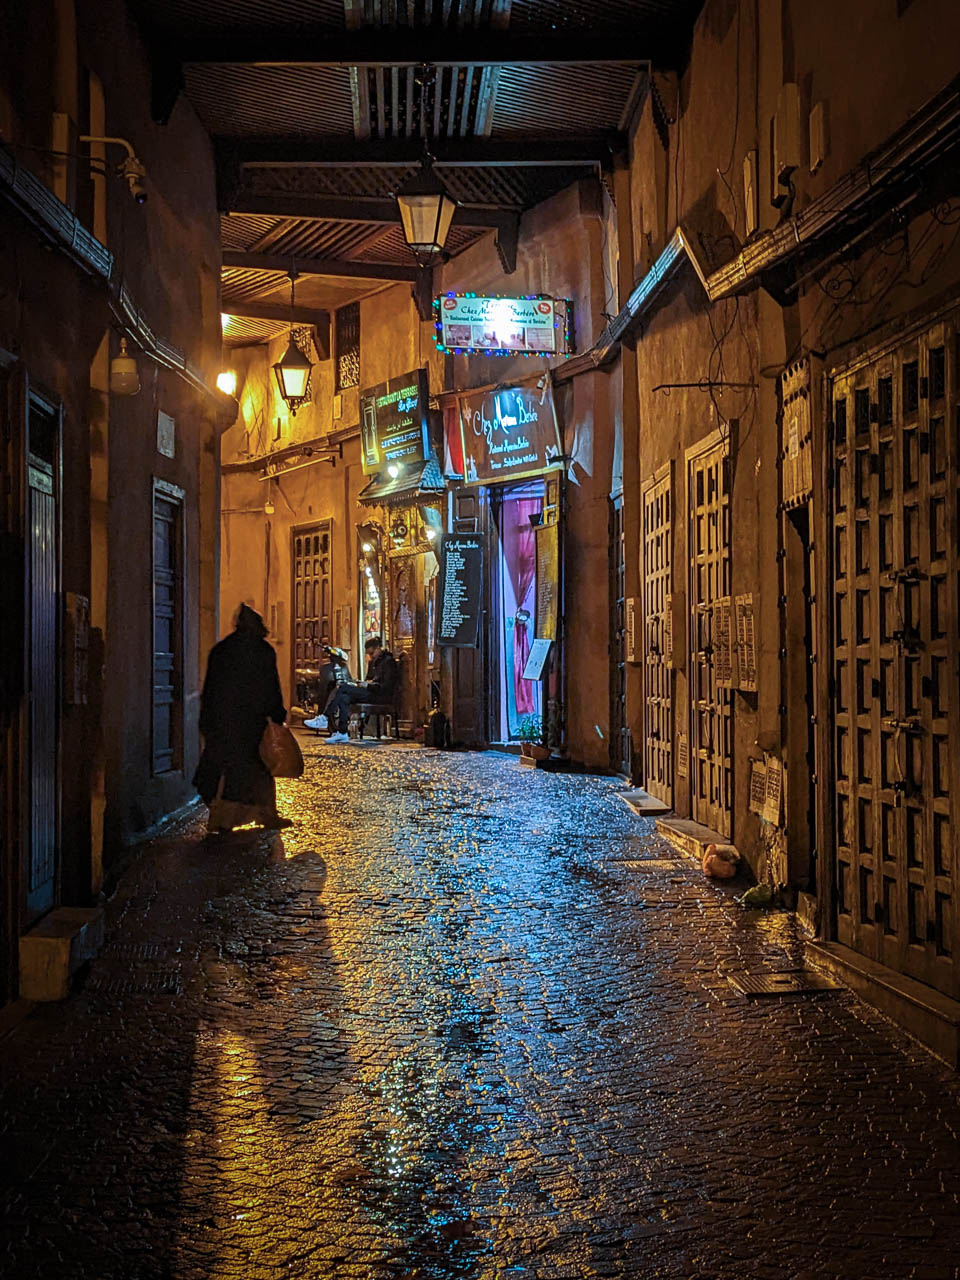 Rainy evening in marrakesh with person walking through the medina.